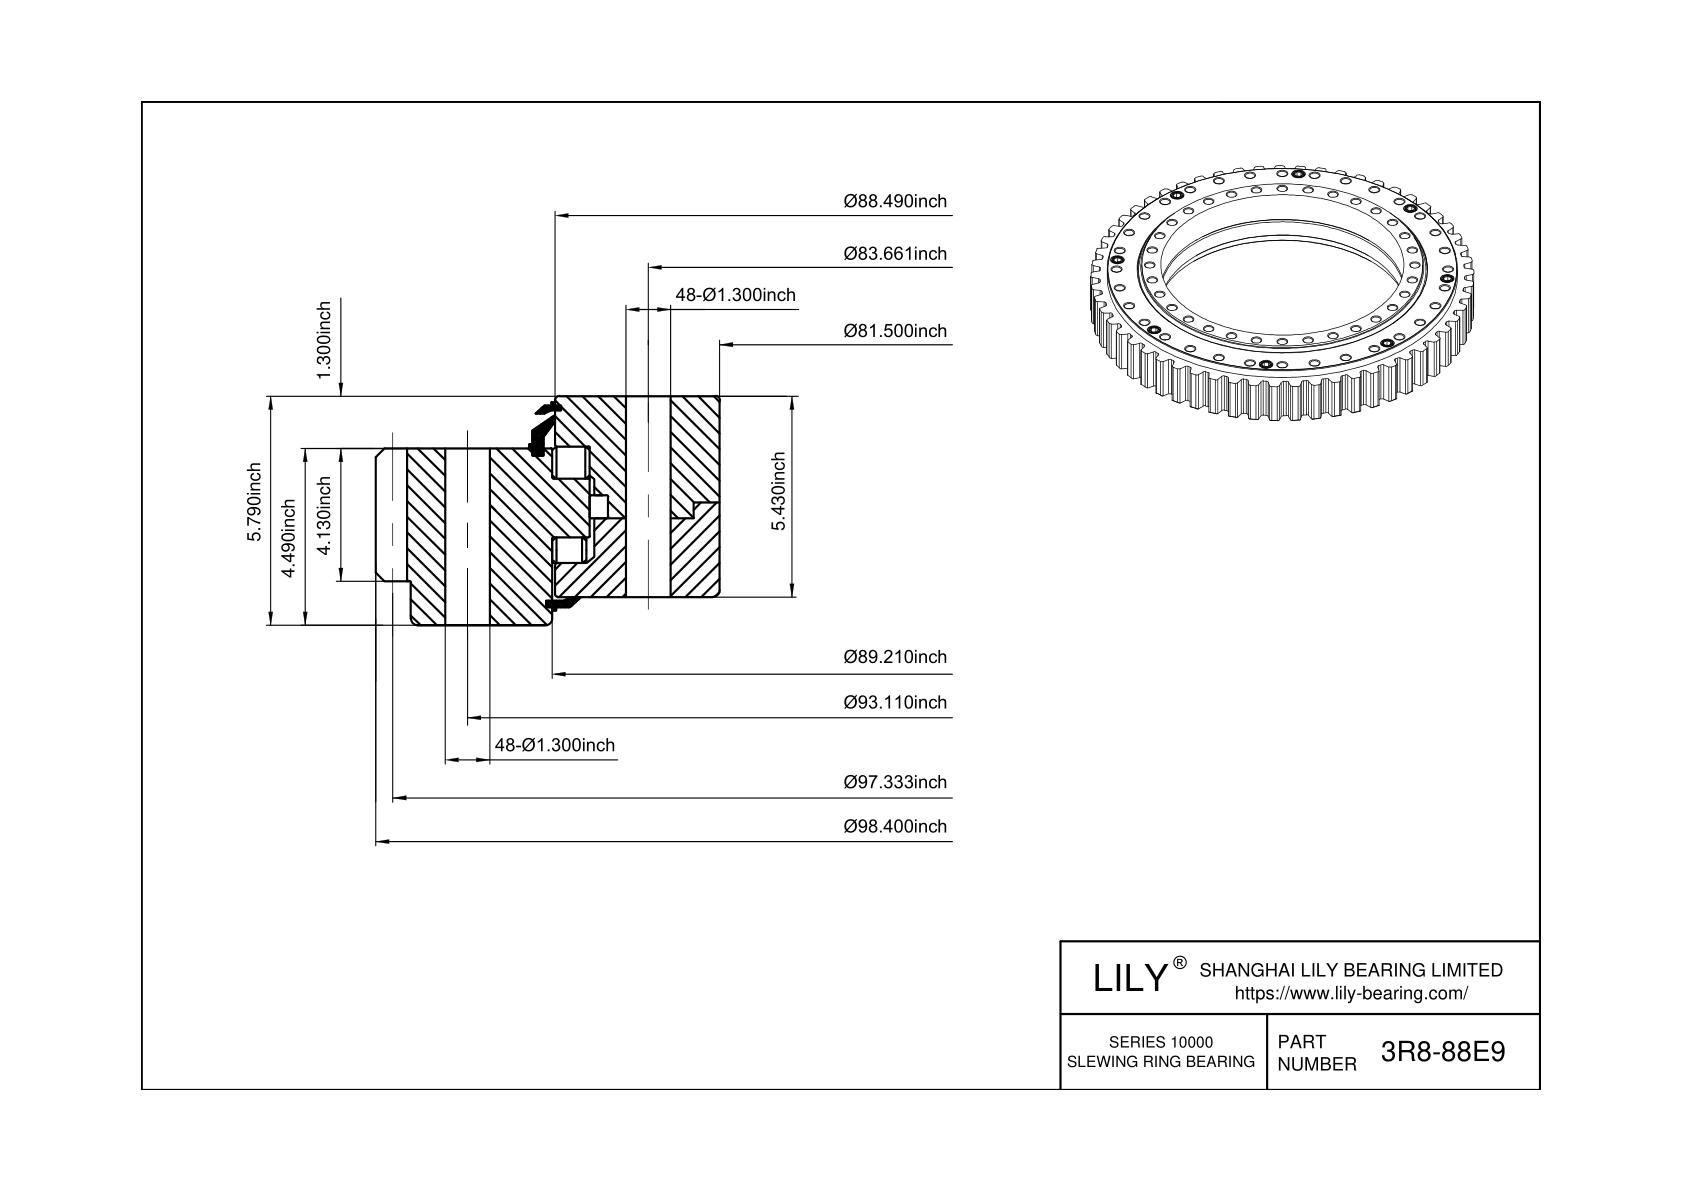 3R8-88E9 Three-Row Cross Roller Slewing Ring Bearing cad drawing